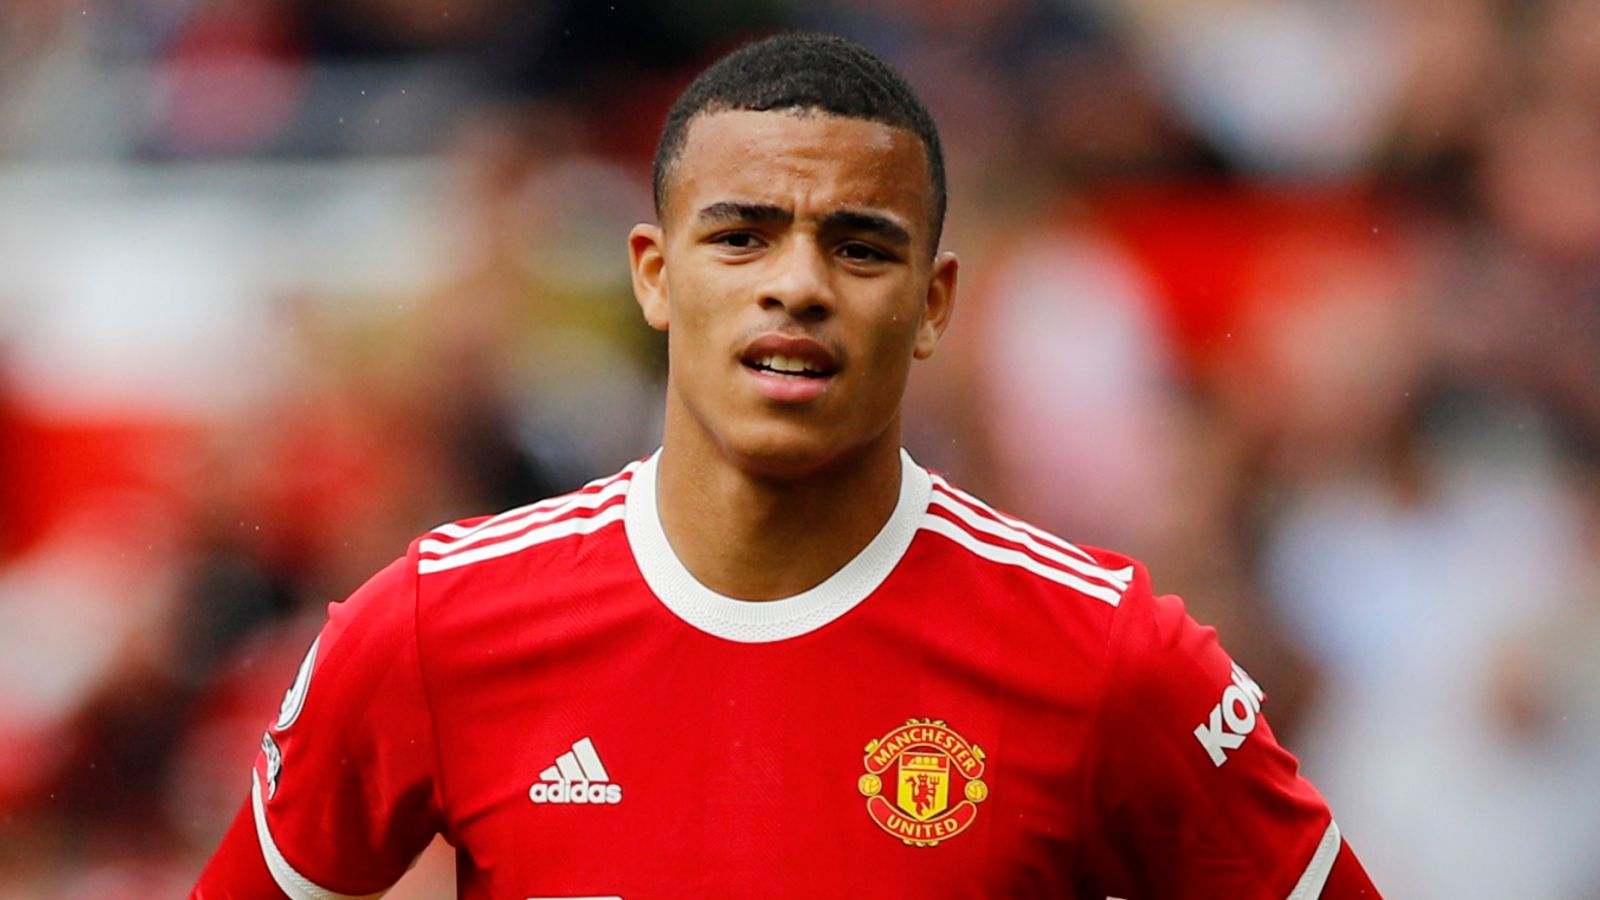 Mason Greenwood’s new manager says loan signing is ‘delicate issue’